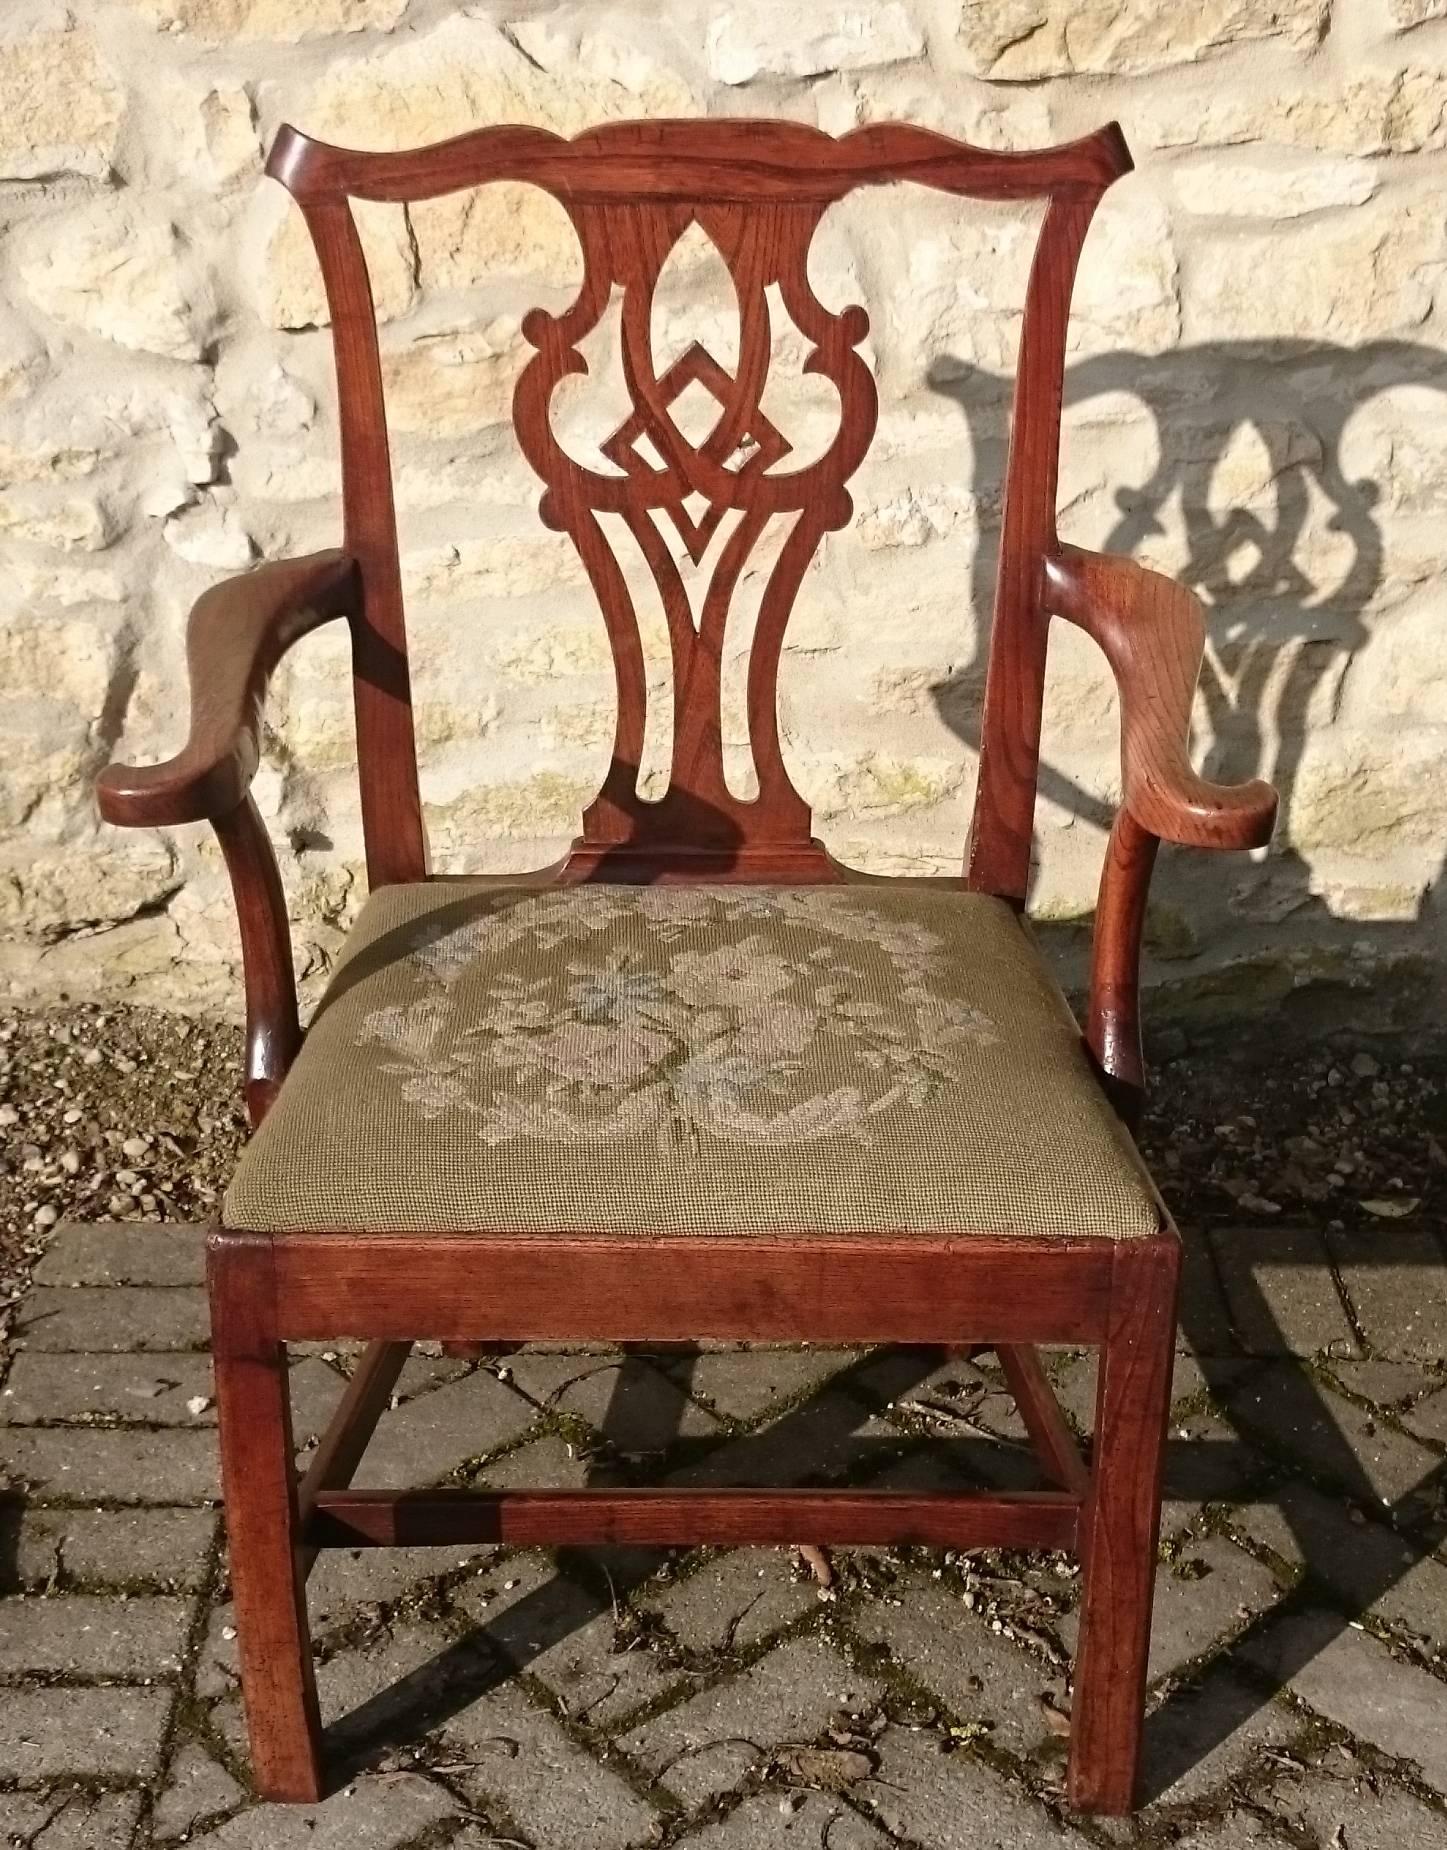 George III period 18th century antique elm armchair with drop in seat in old flat-weave fabric. This is a charming armchair made of sought after indigenous elmwood which has faded to a desirable color with a good deep patina. The pierced back splat